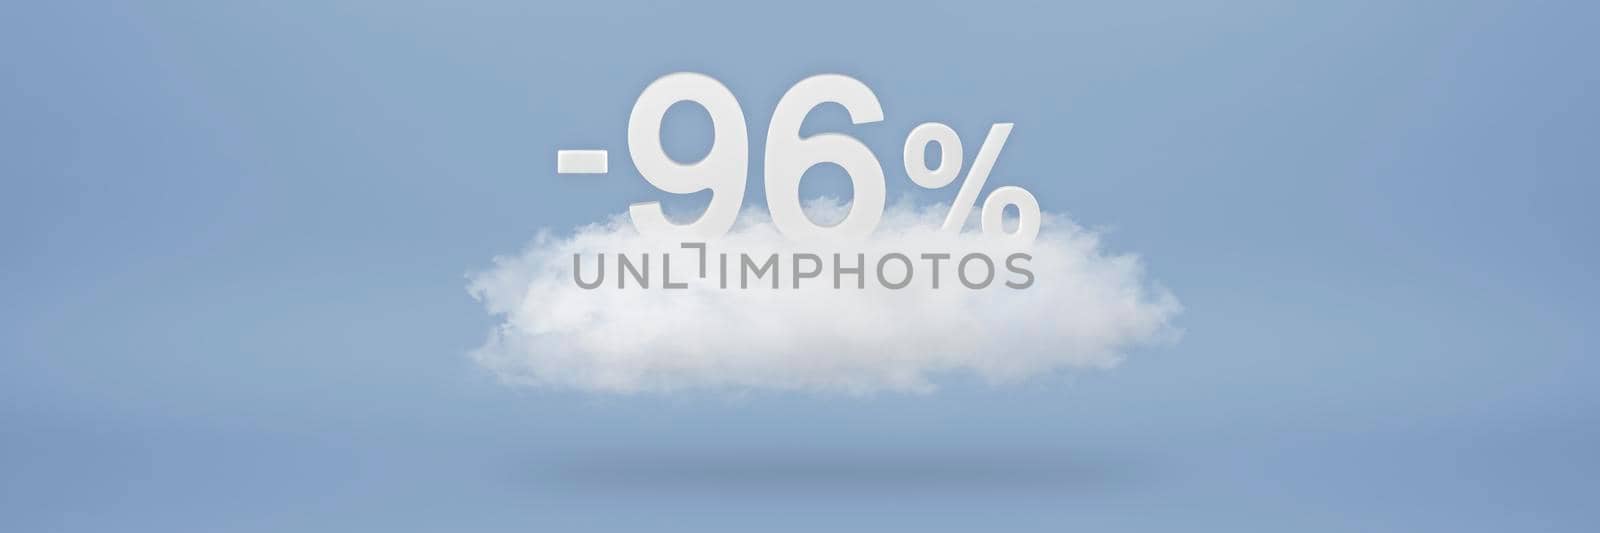 Discount 96 percent. Big discounts, sale up to ninety six percent. 3D numbers float on a cloud on a blue background. Copy space. Advertising banner and poster to be inserted into the project.